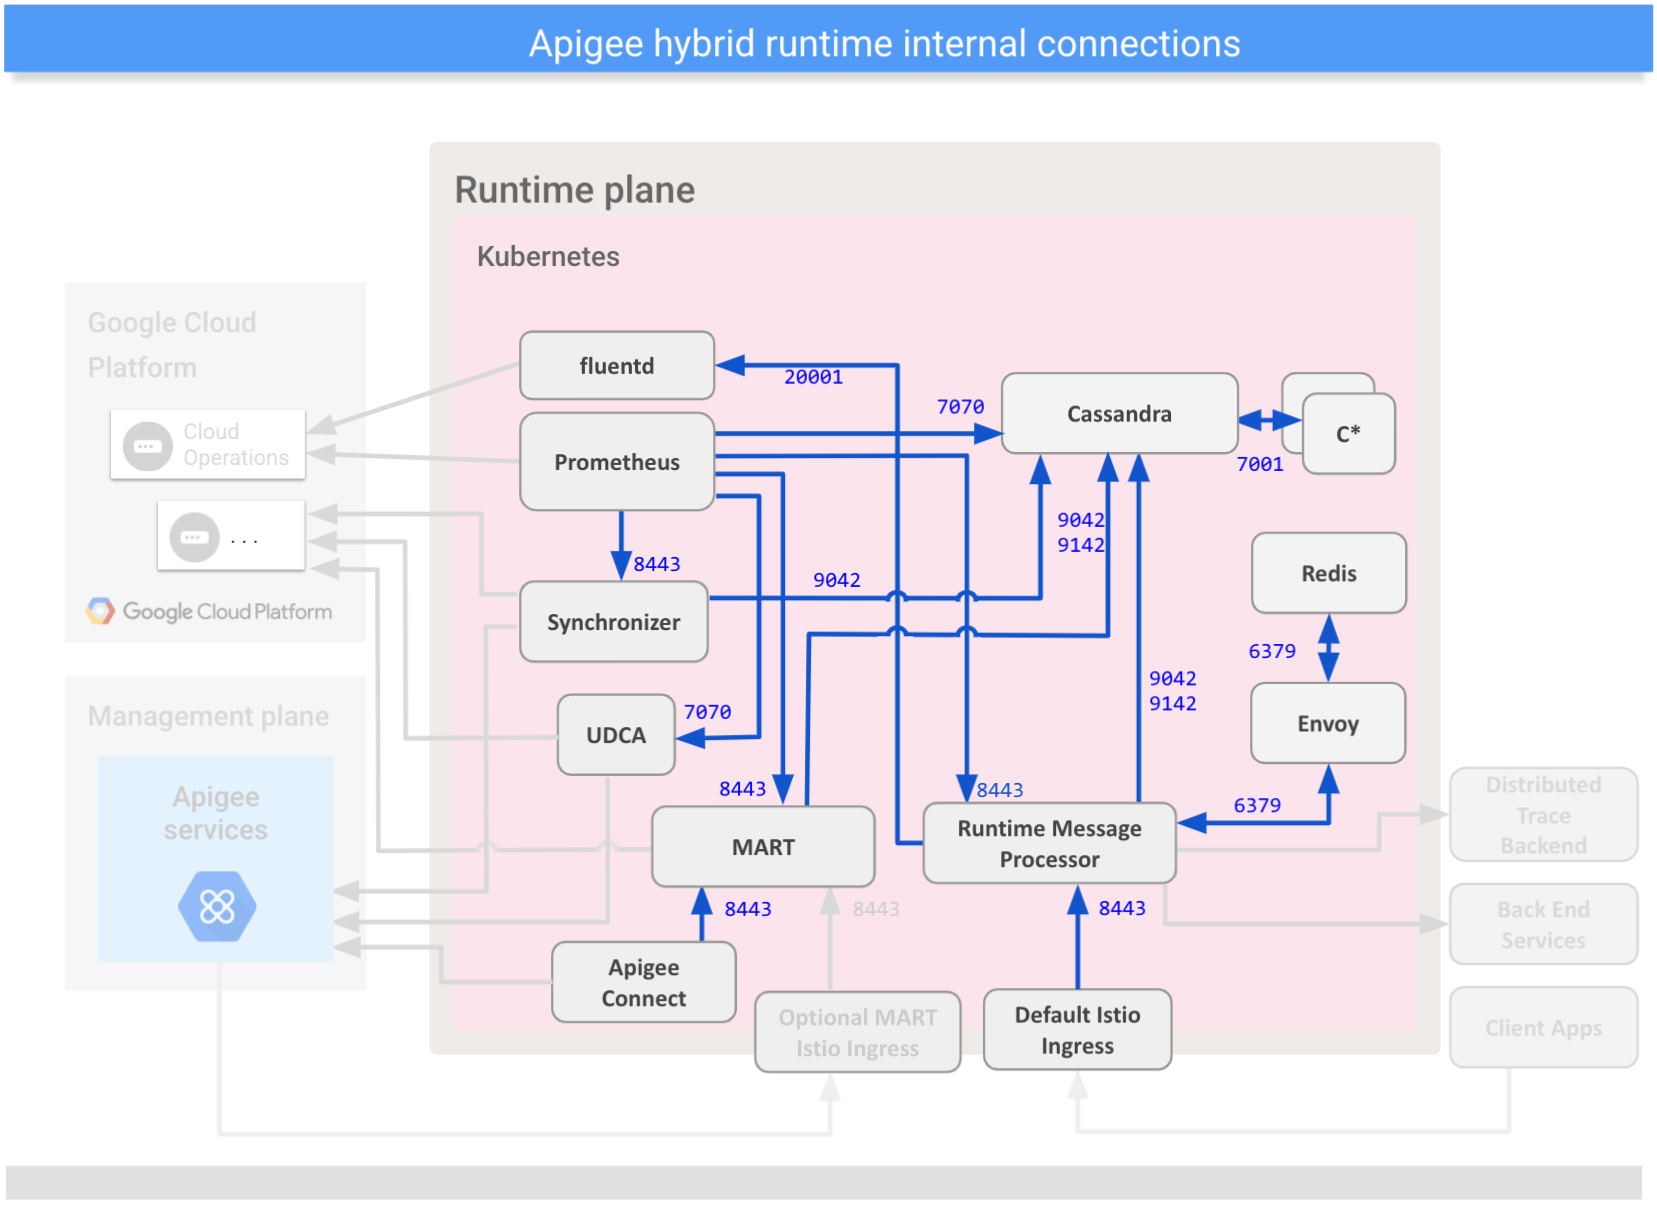 Shows connections
between internal components on the hybrid runtime plane